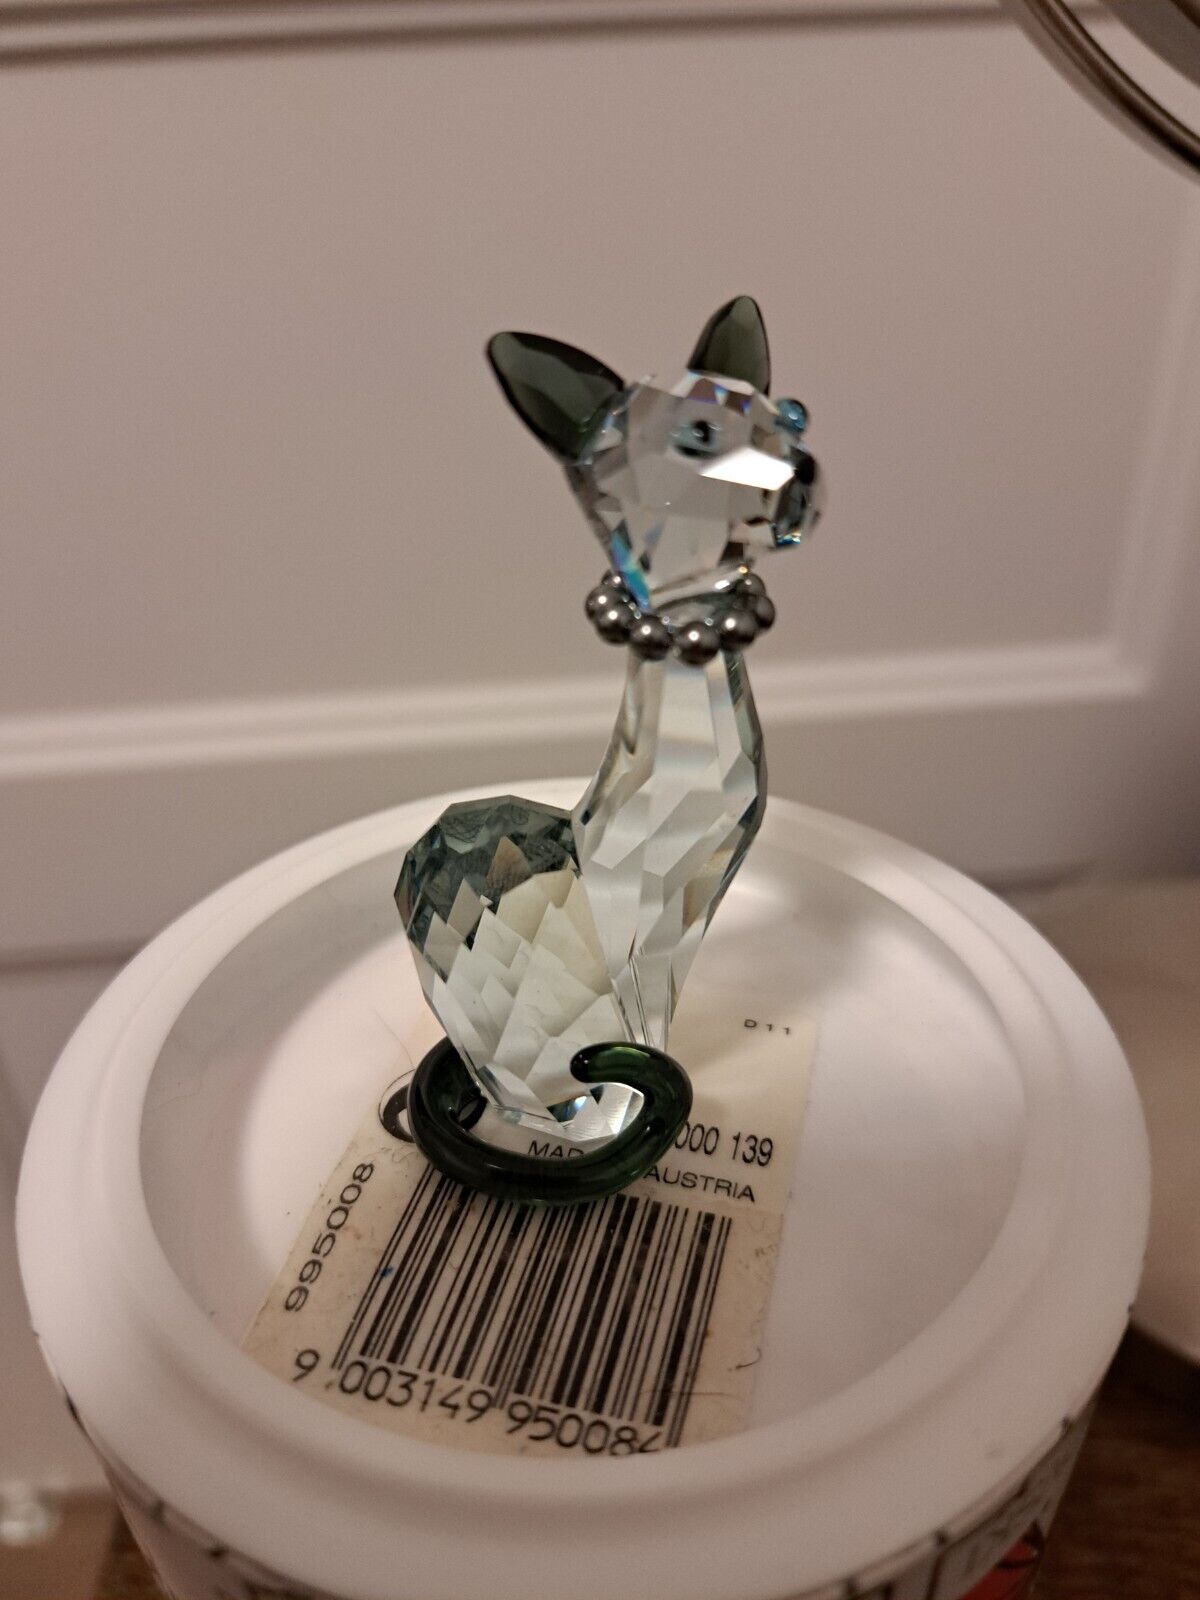 Swarovski Crystal 995008 Lovlots Ines the Cat A9100 NR 000 139 (Boxed with...